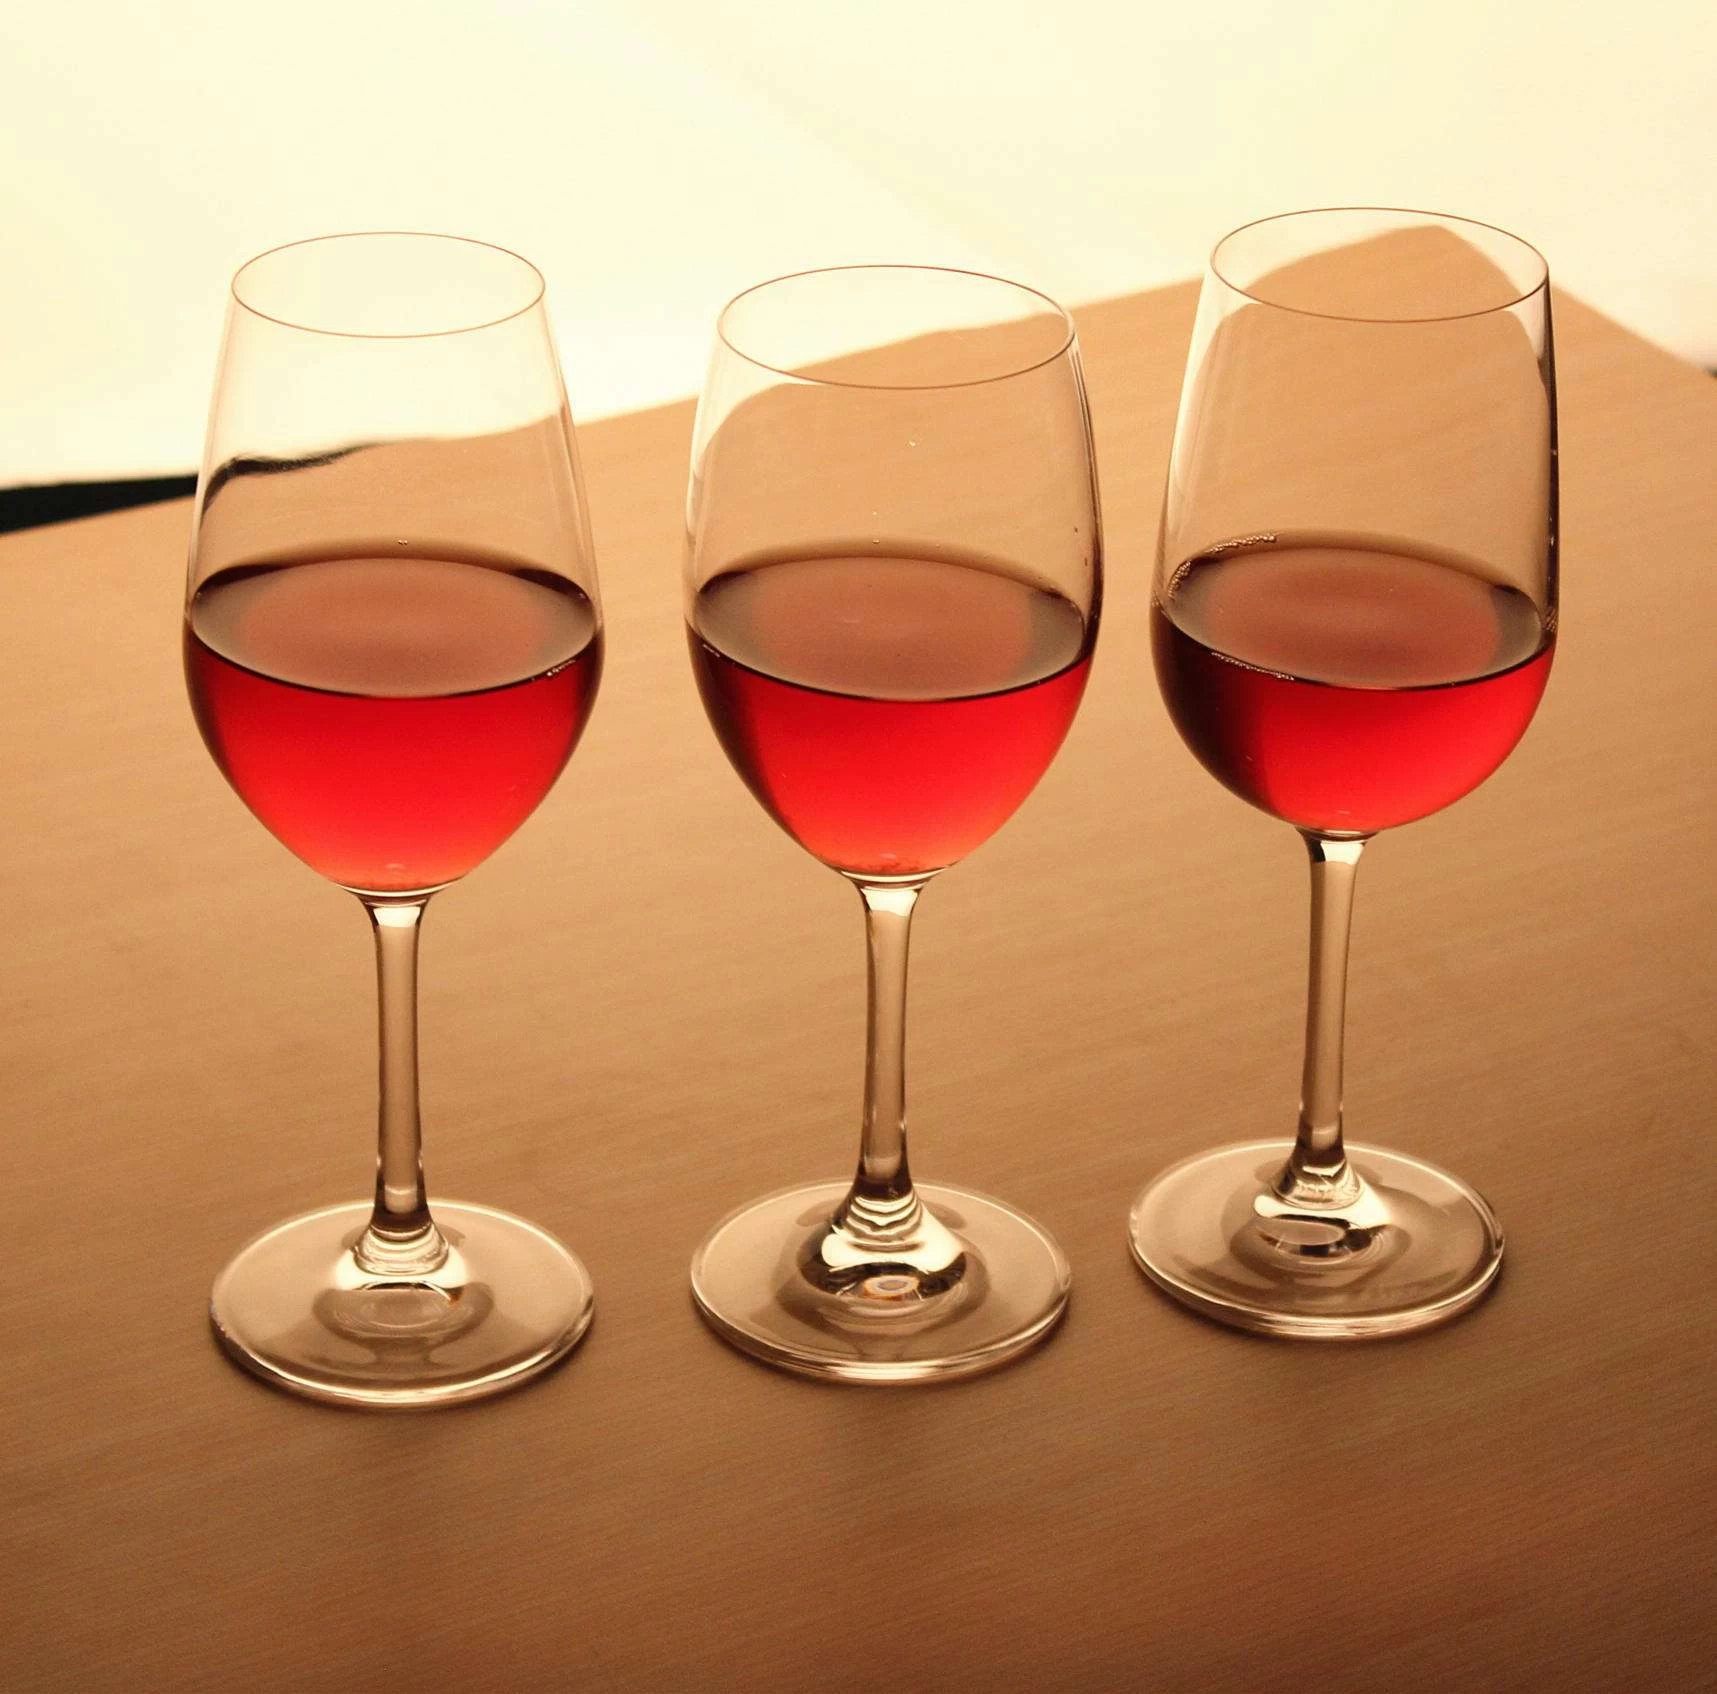 How to identify the quality of red wine glasses